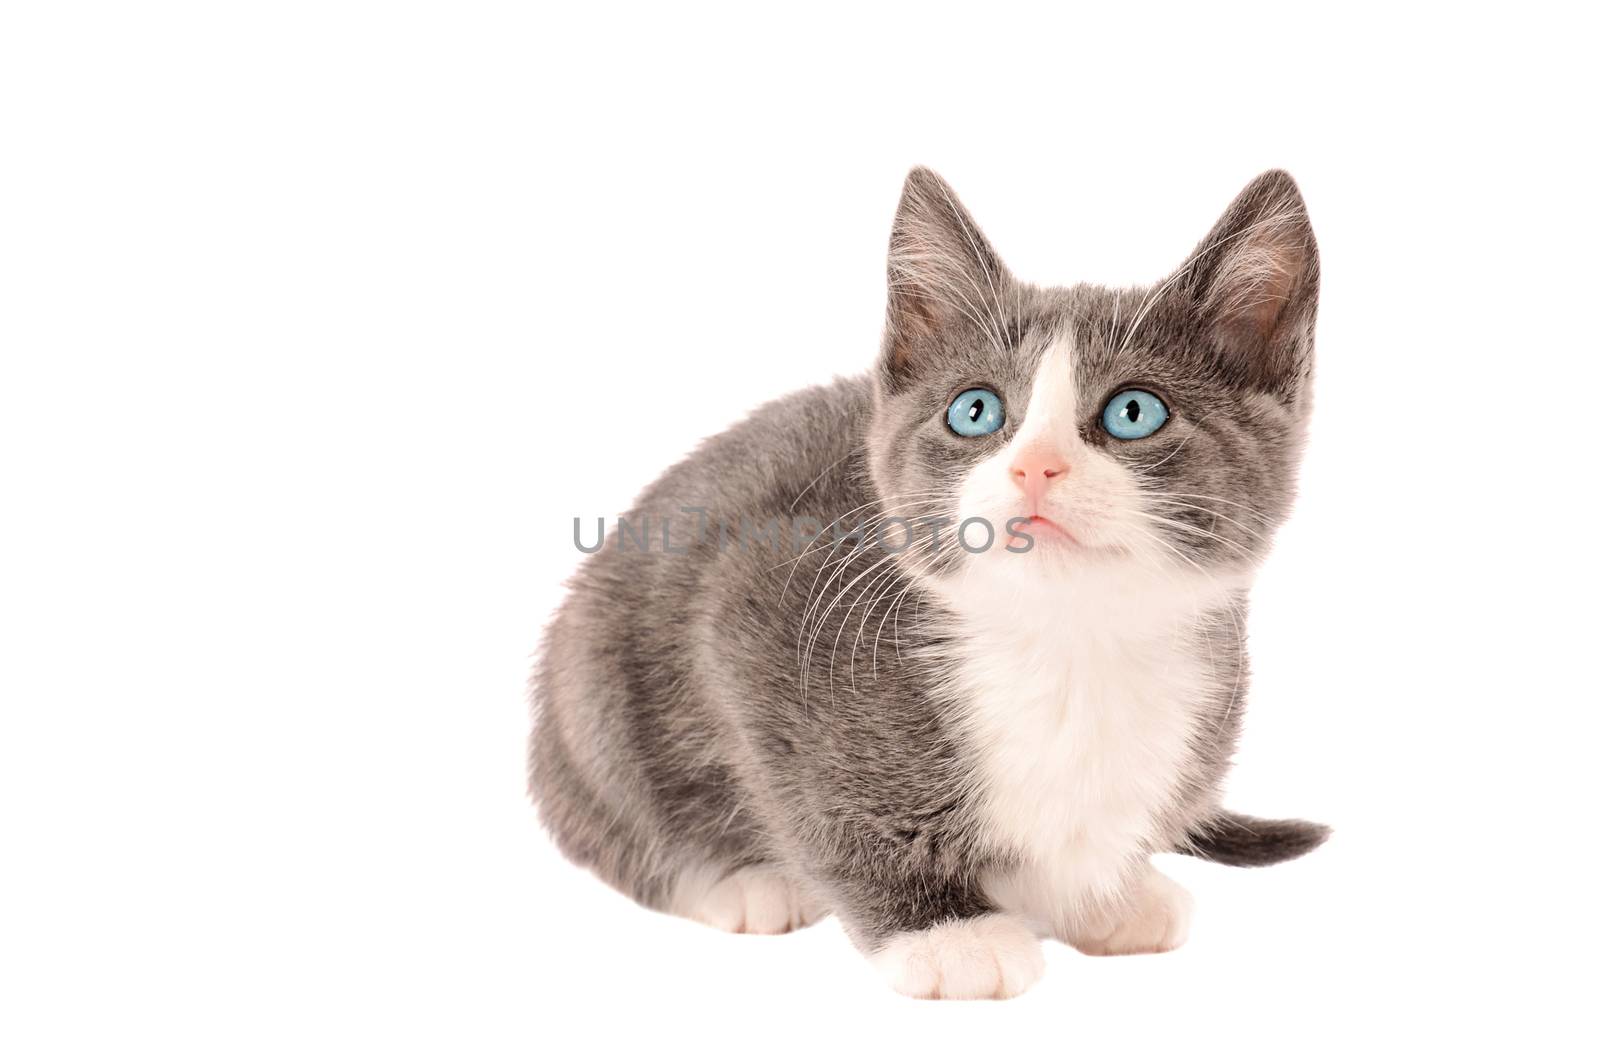 A white and grey kitten sitting a white background looking up